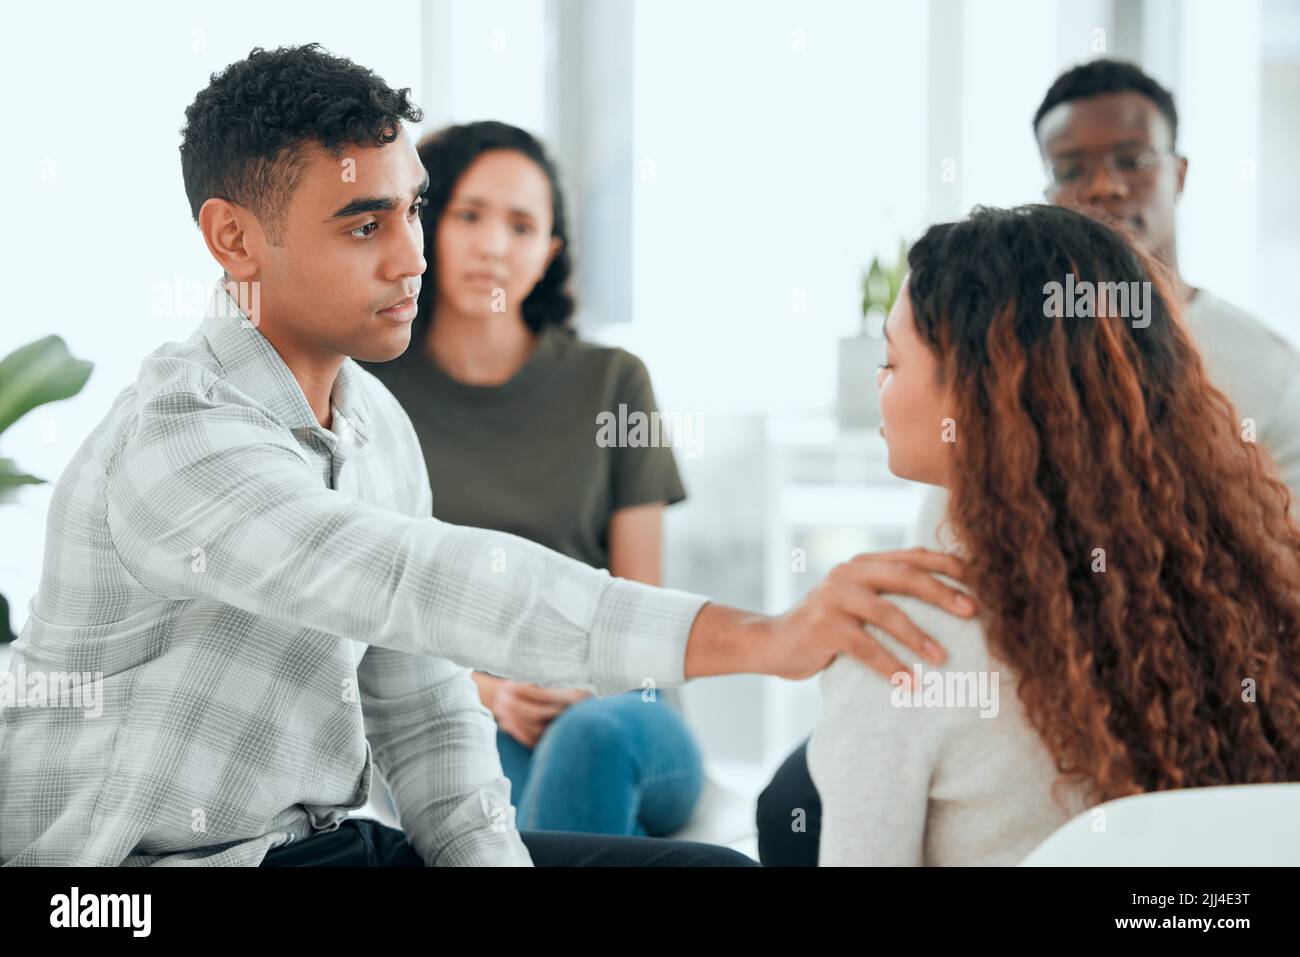 Were here for you. a handsome young man sitting and comforting a member of his support group. Stock Photo